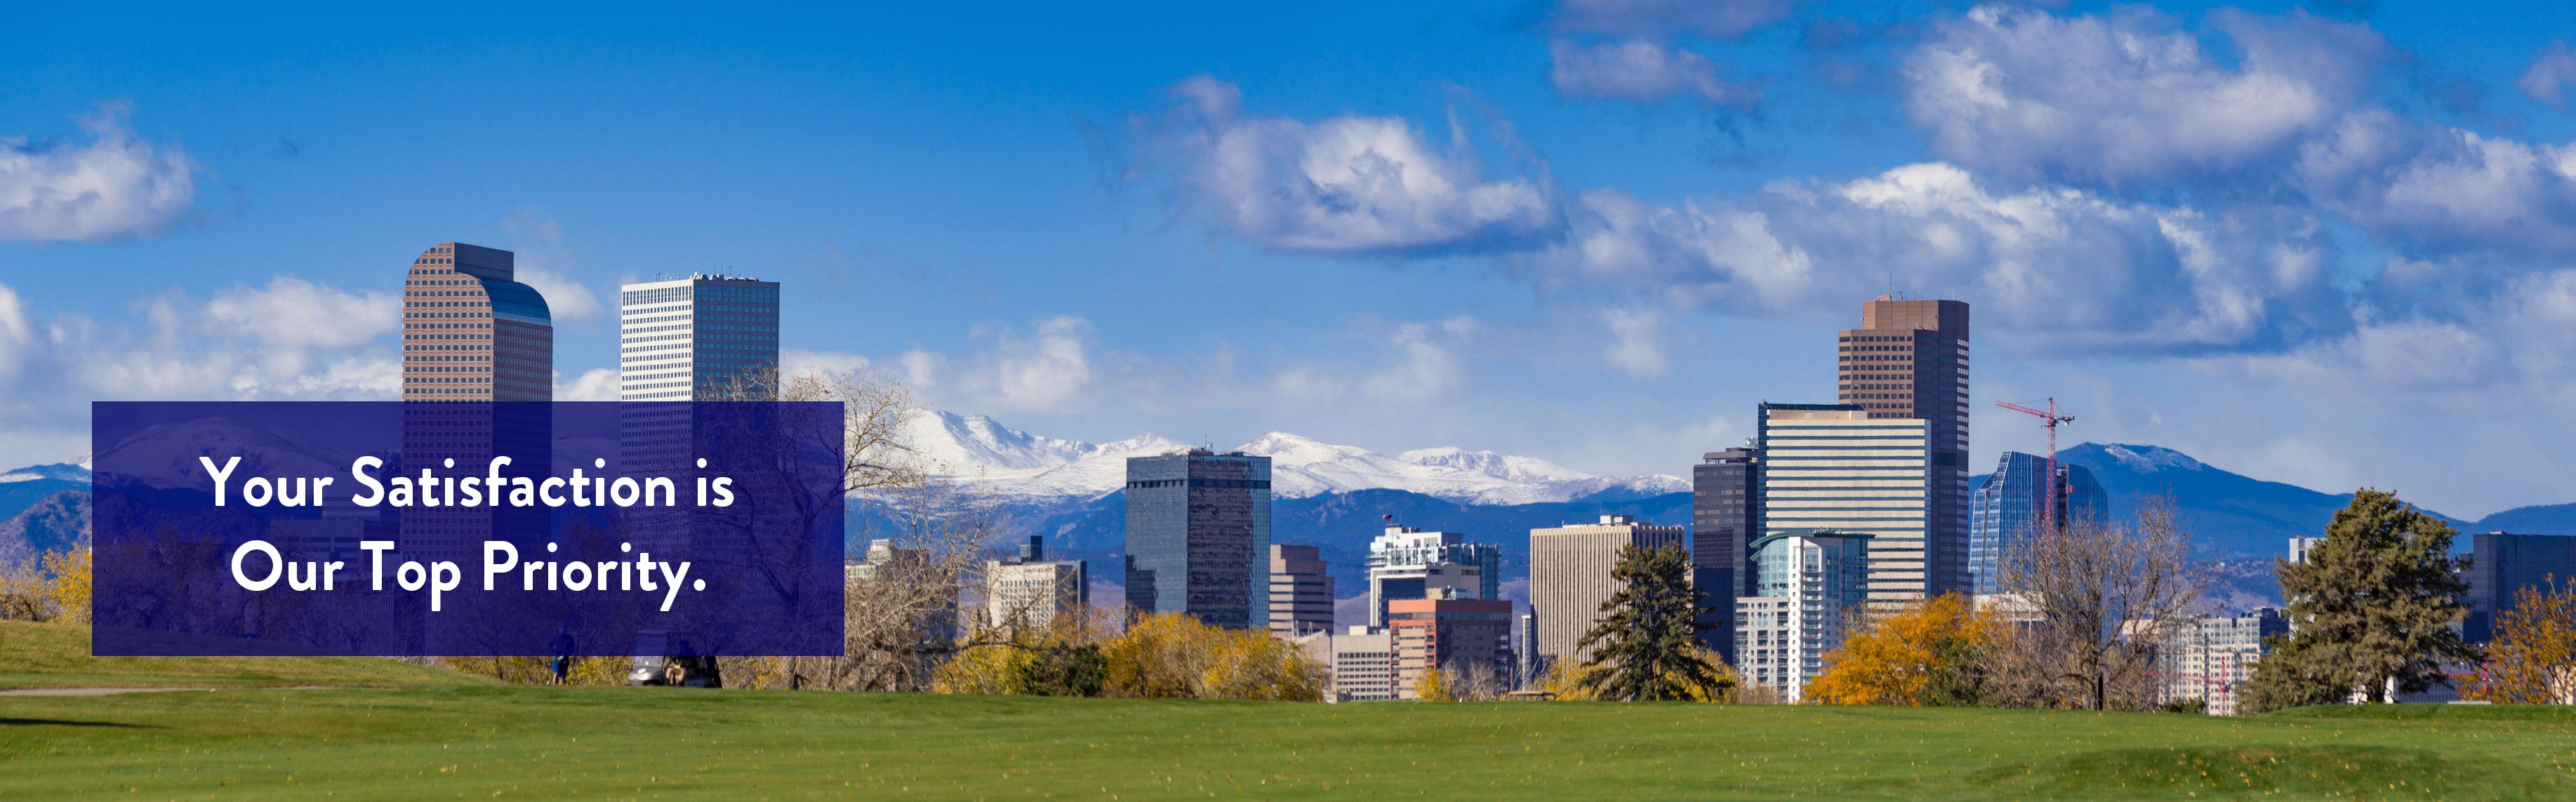 Denver Skyline with Mountains